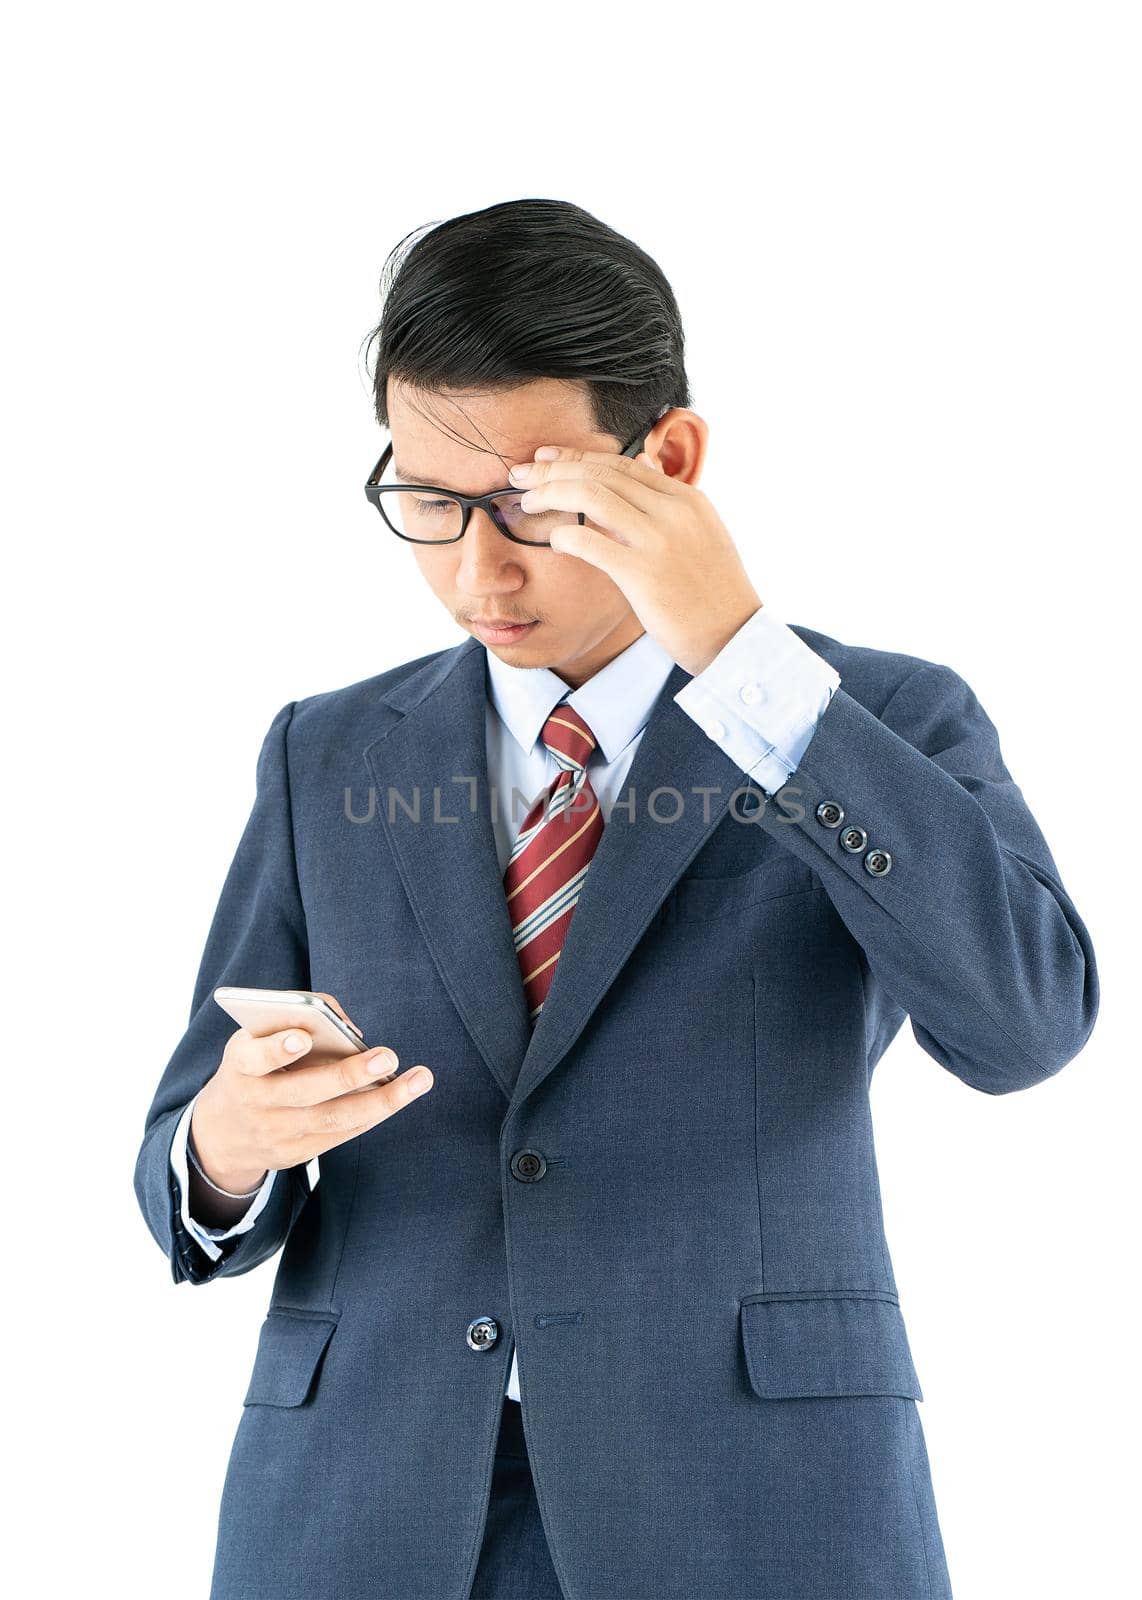 Businessman in suit holding smartphone by stoonn